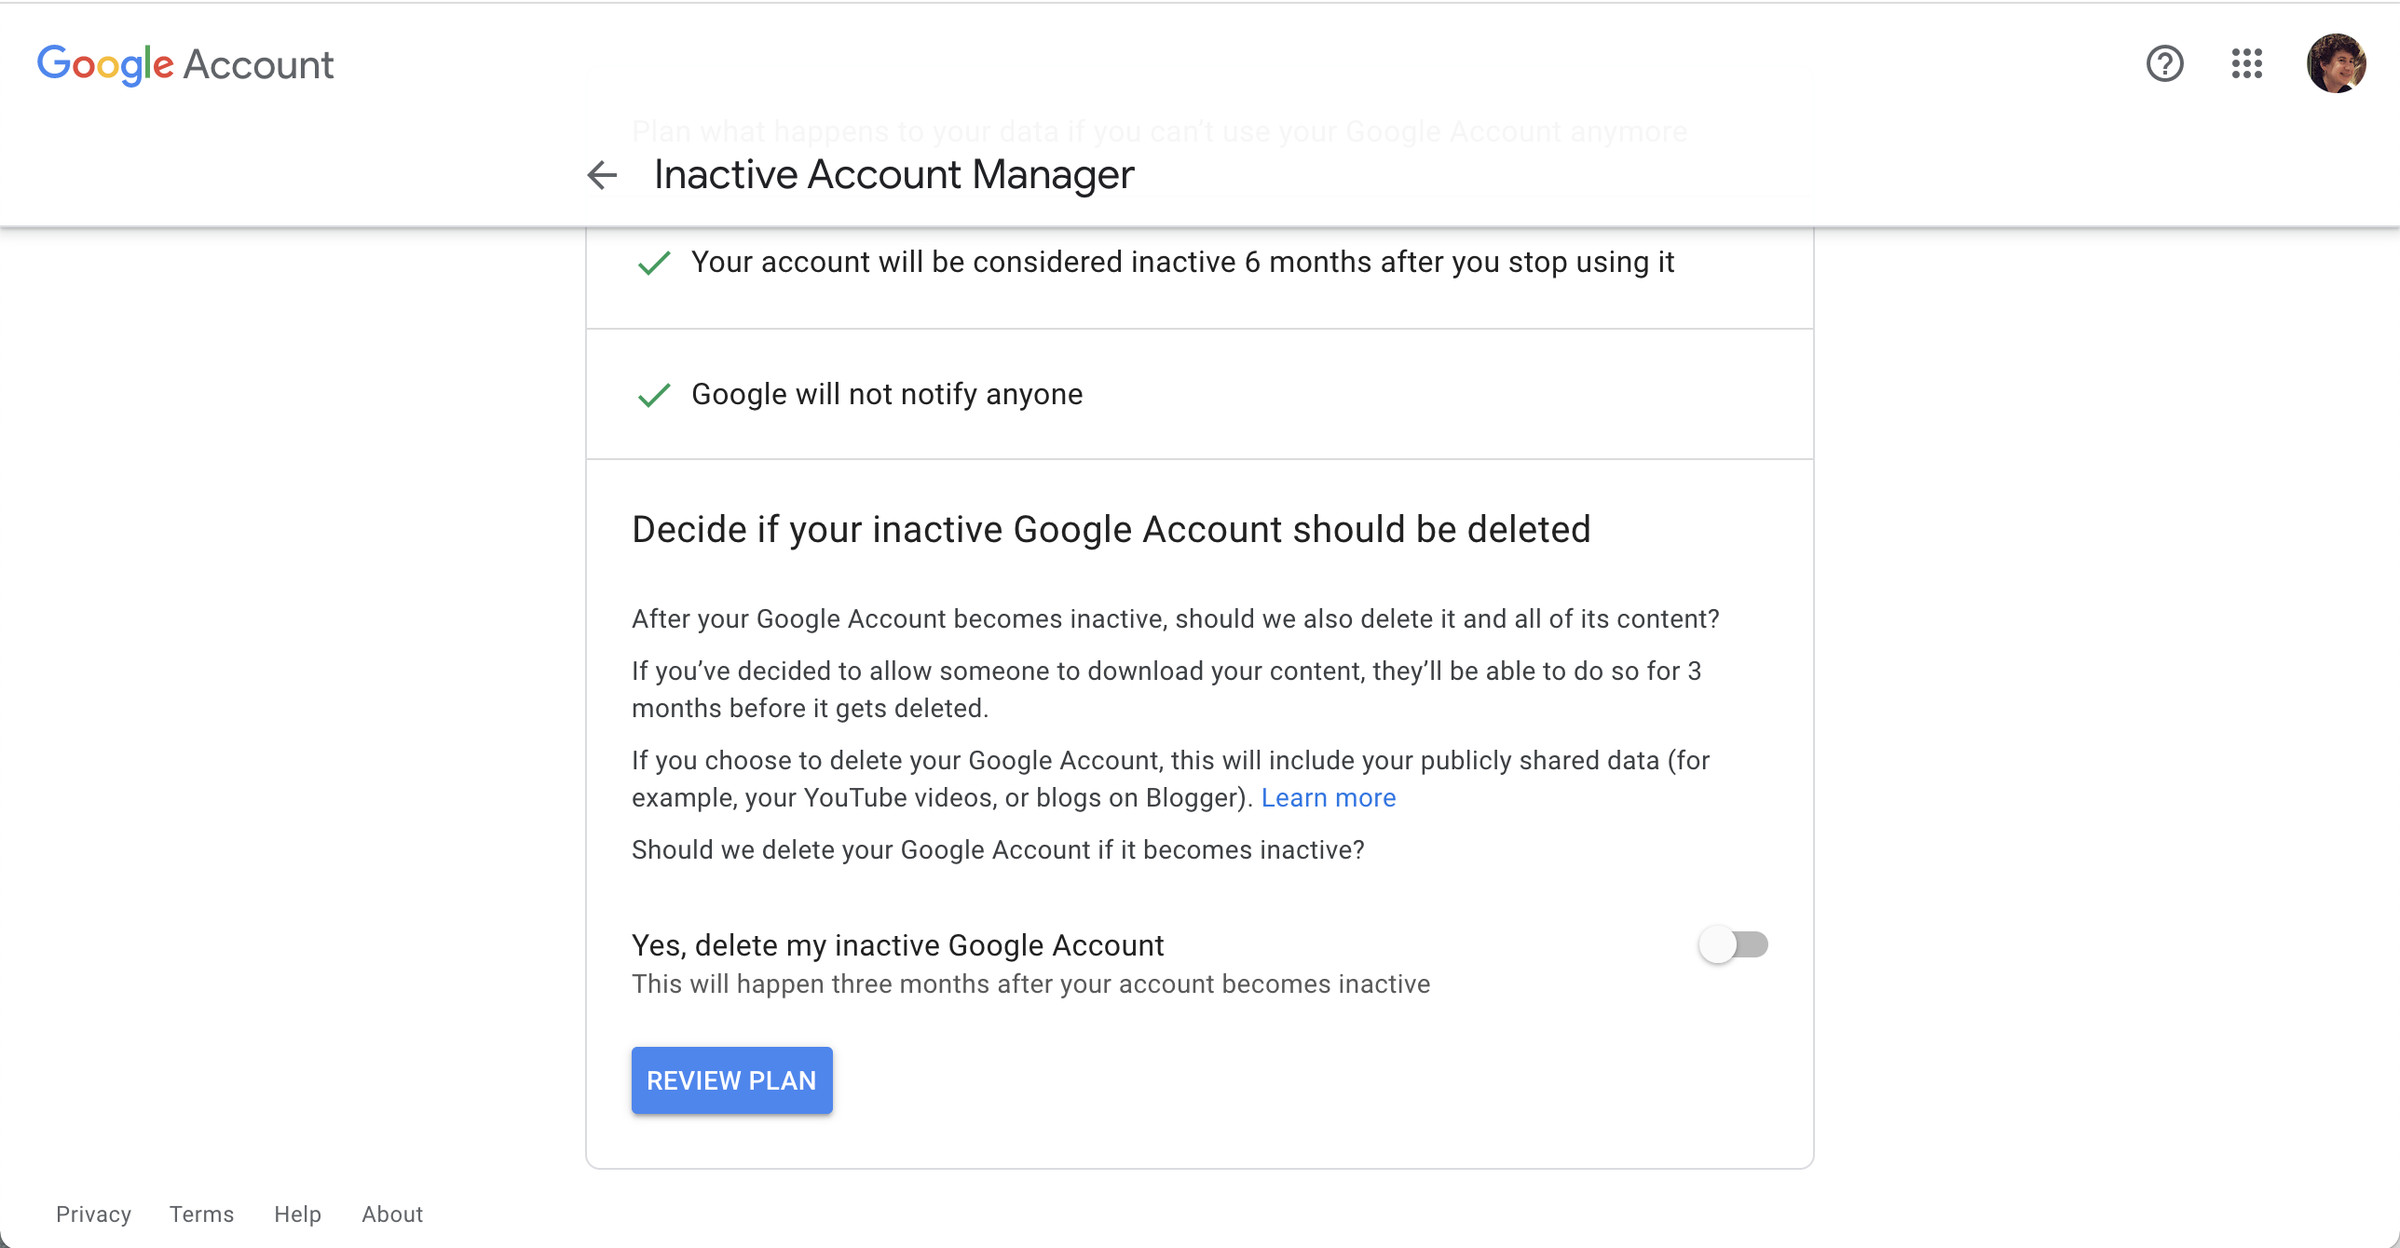 If requested, Google will delete your entire account after three months.